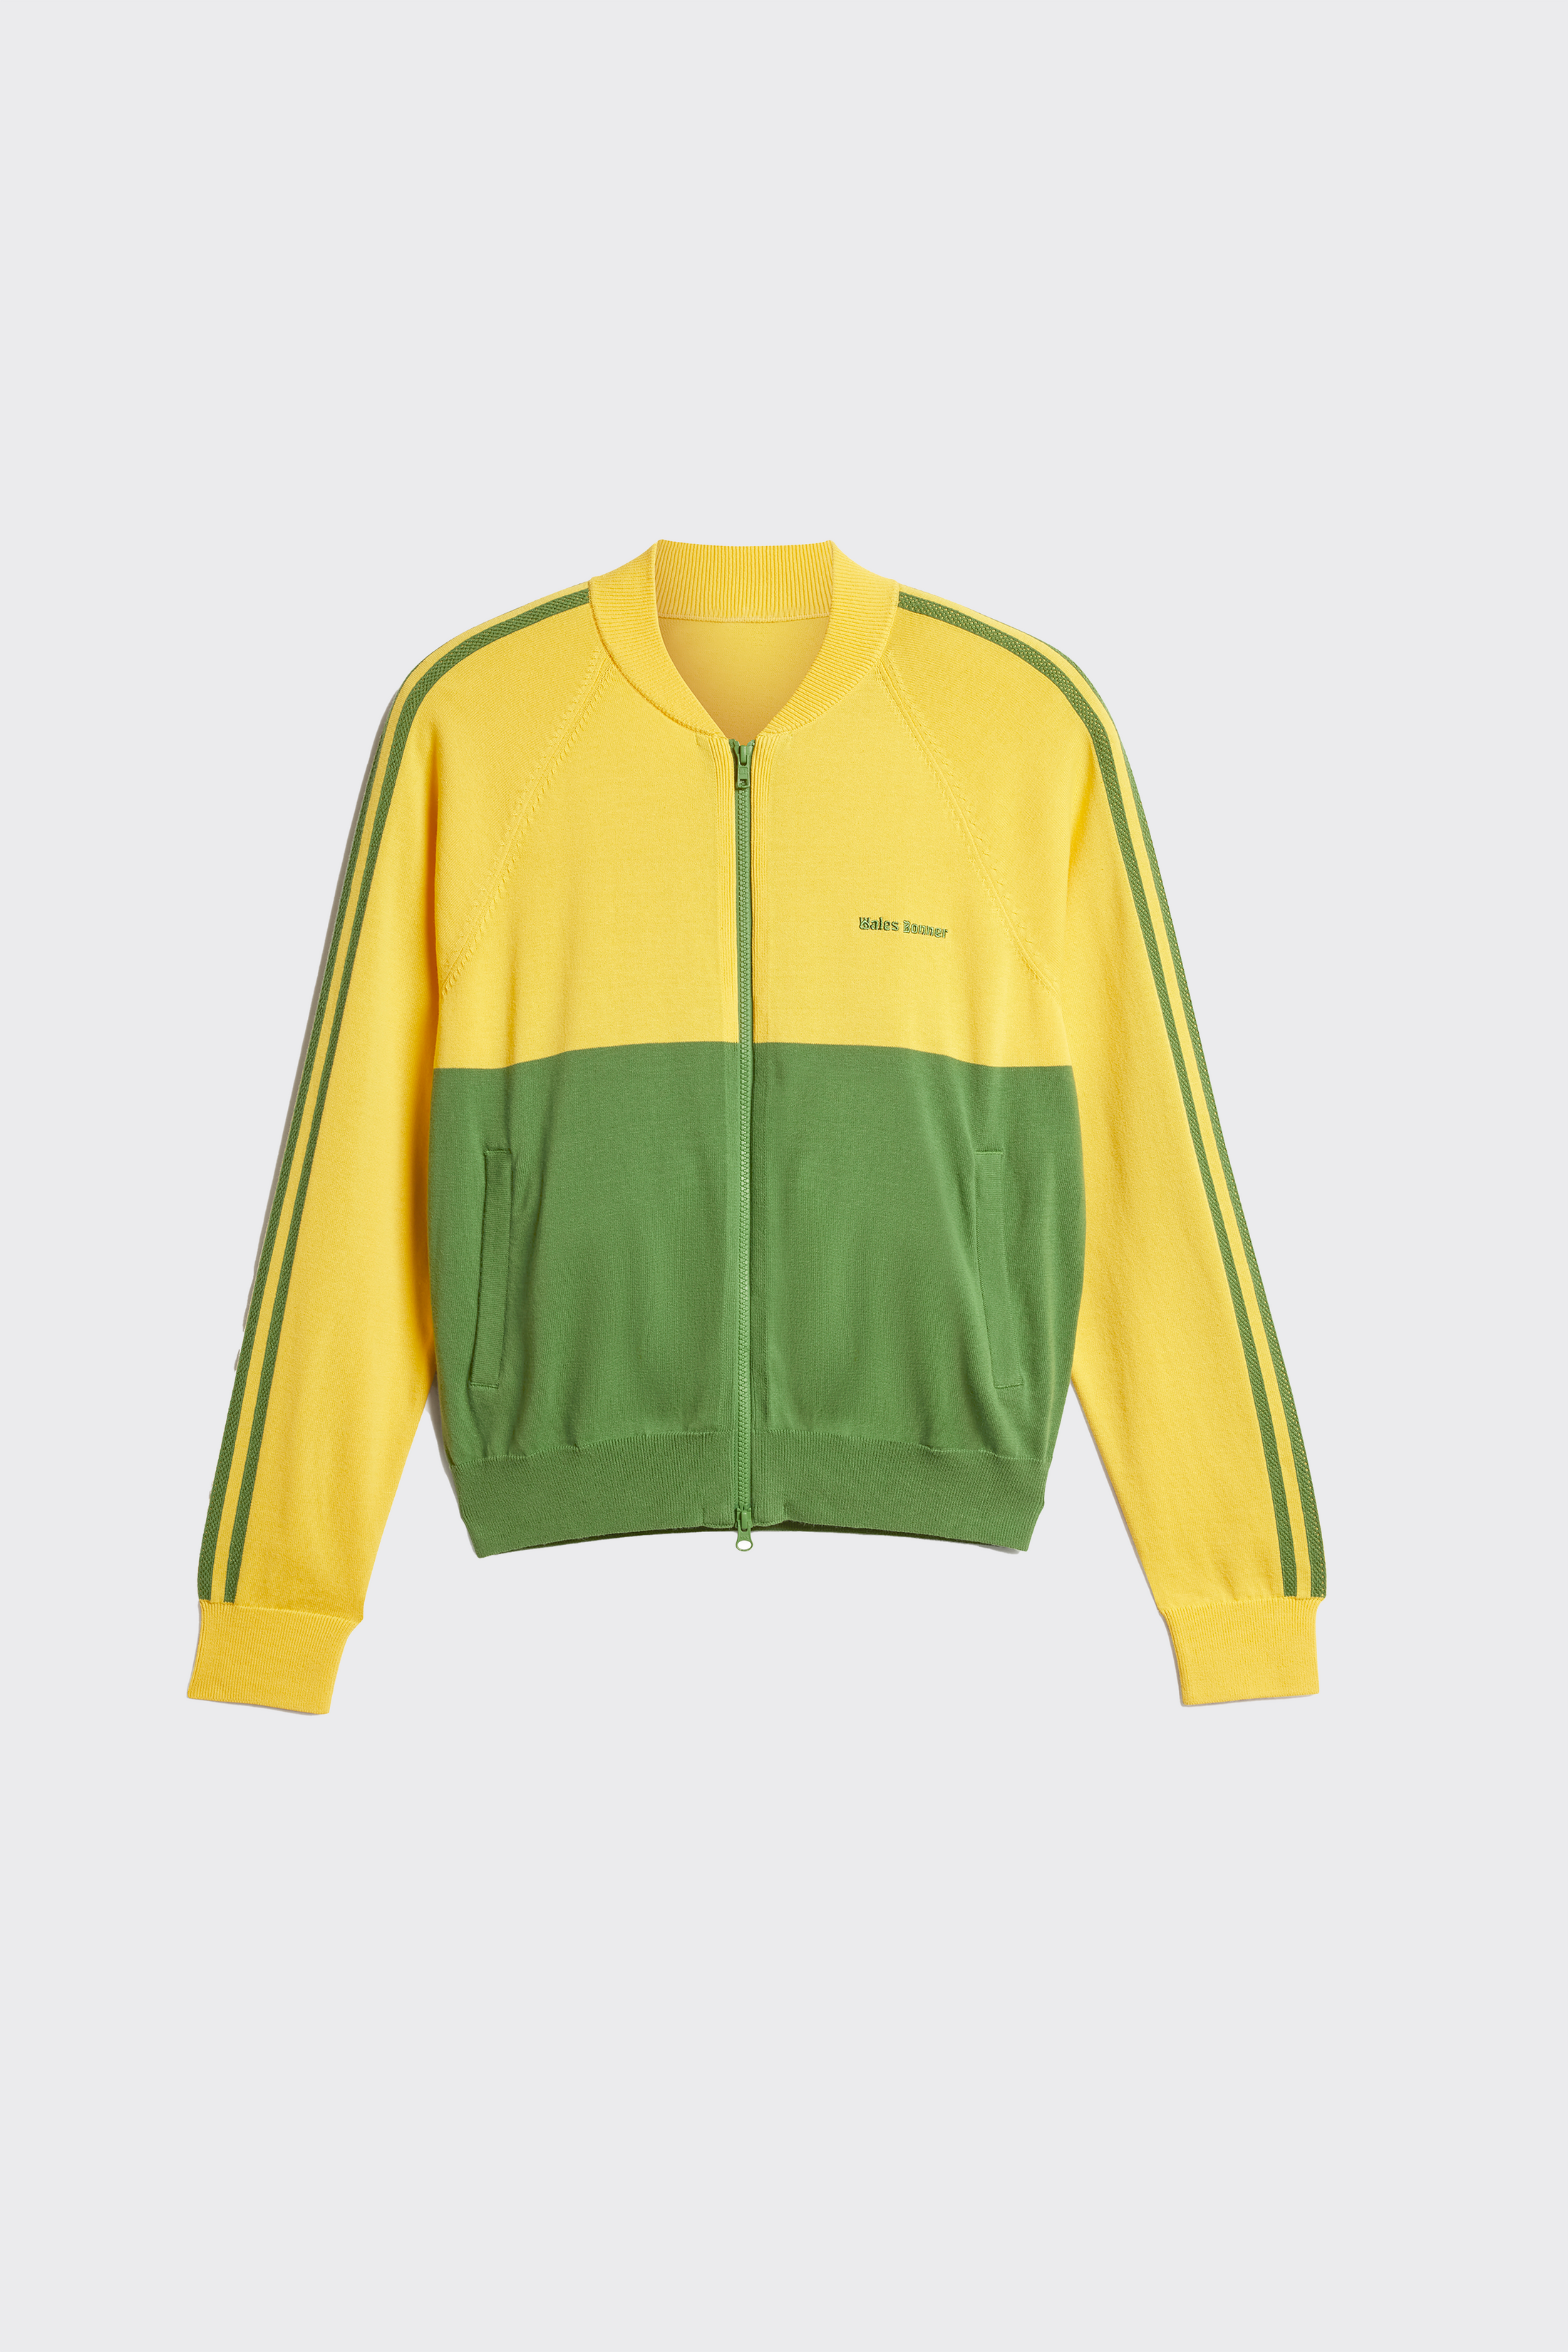 Adidas Originals by Wales Bonner Knit Track Top